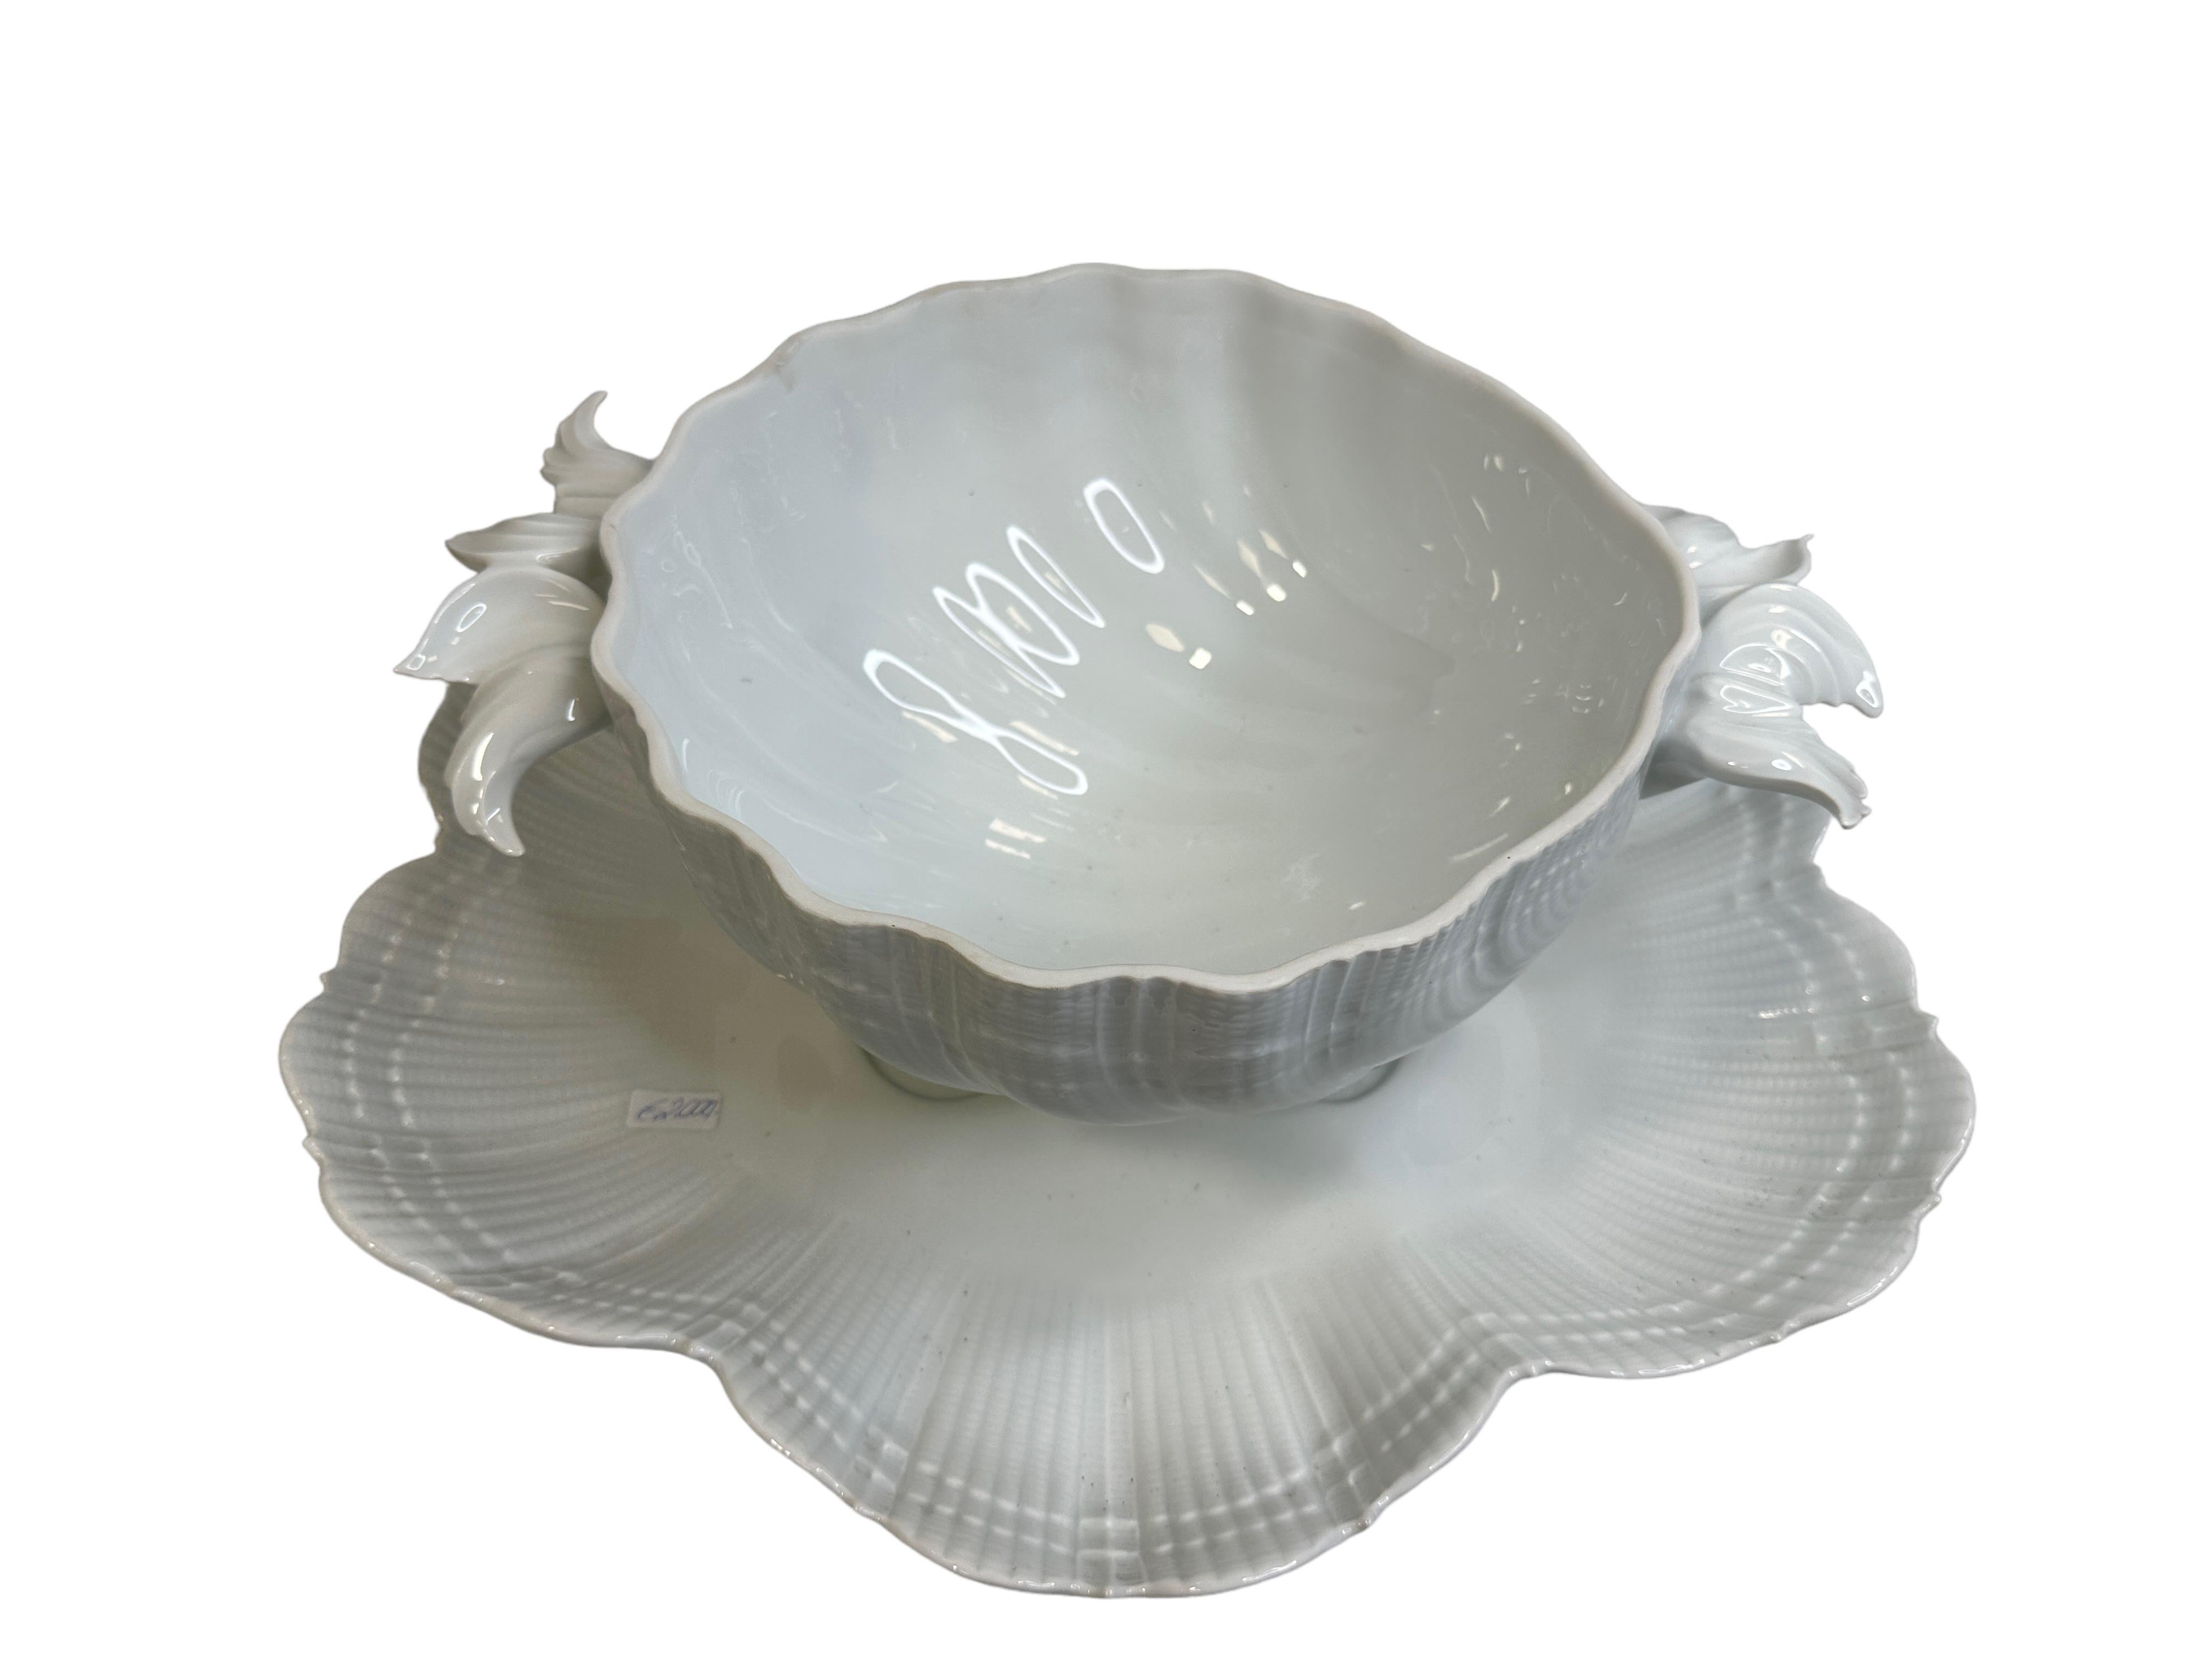 Exceptional Shell Shaped Limoges China Porcelain Soup Tureen with Dolphin Decor For Sale 2